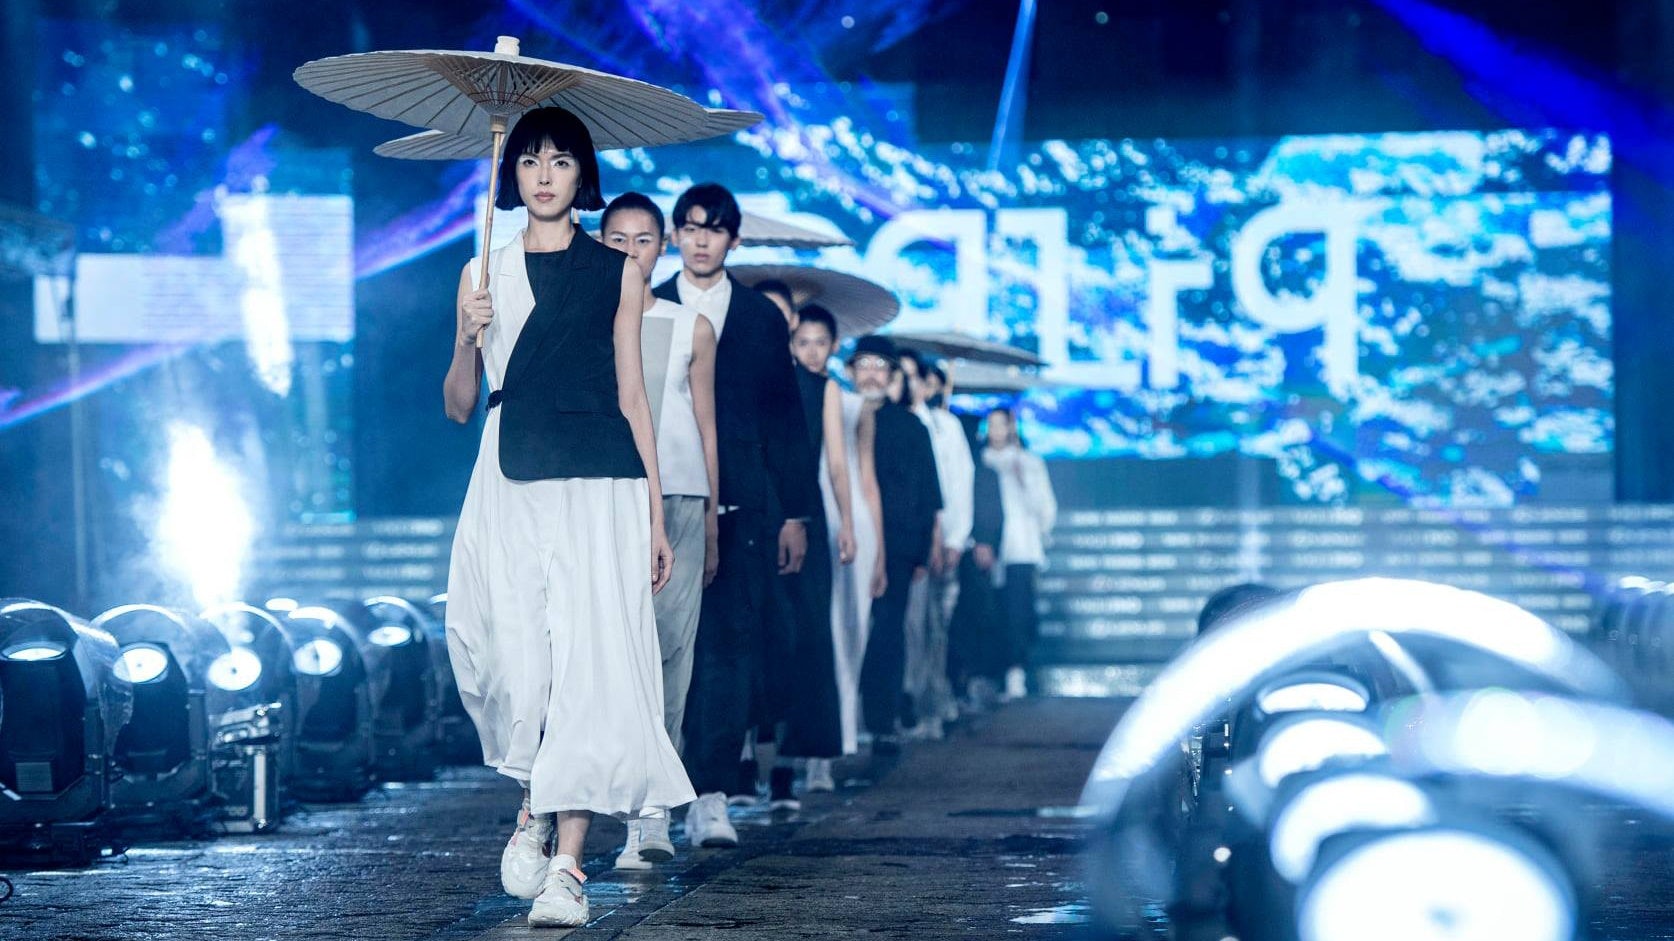 Sustainability was at the heart of this year’s Shanghai Fashion Week programming, but can the trend truly take hold in China? Photo: Courtesy of Oqliq